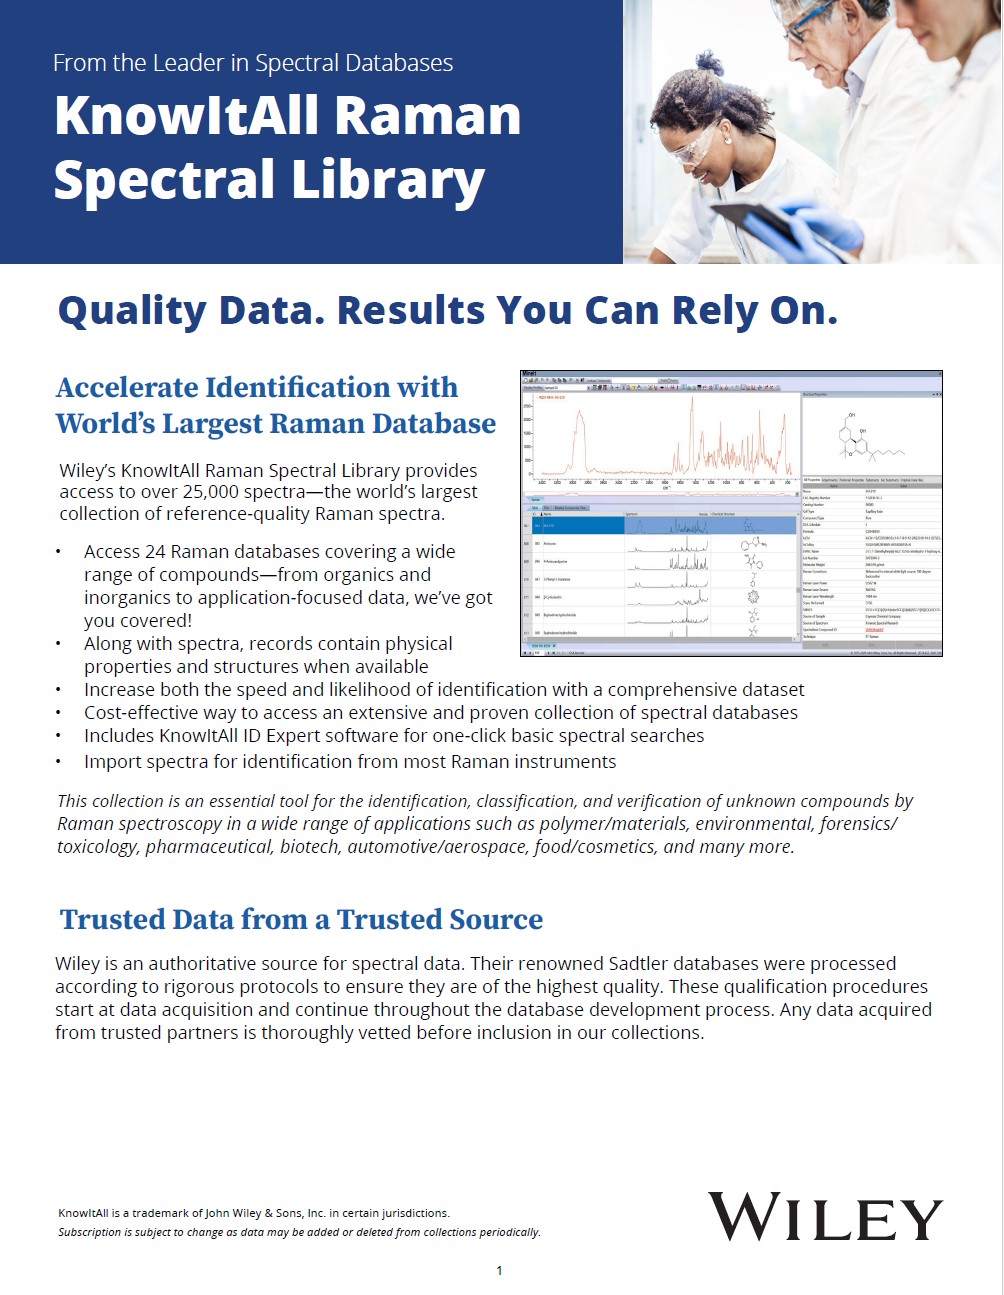 Wiley KnowItAll Raman Spectral Database Collection